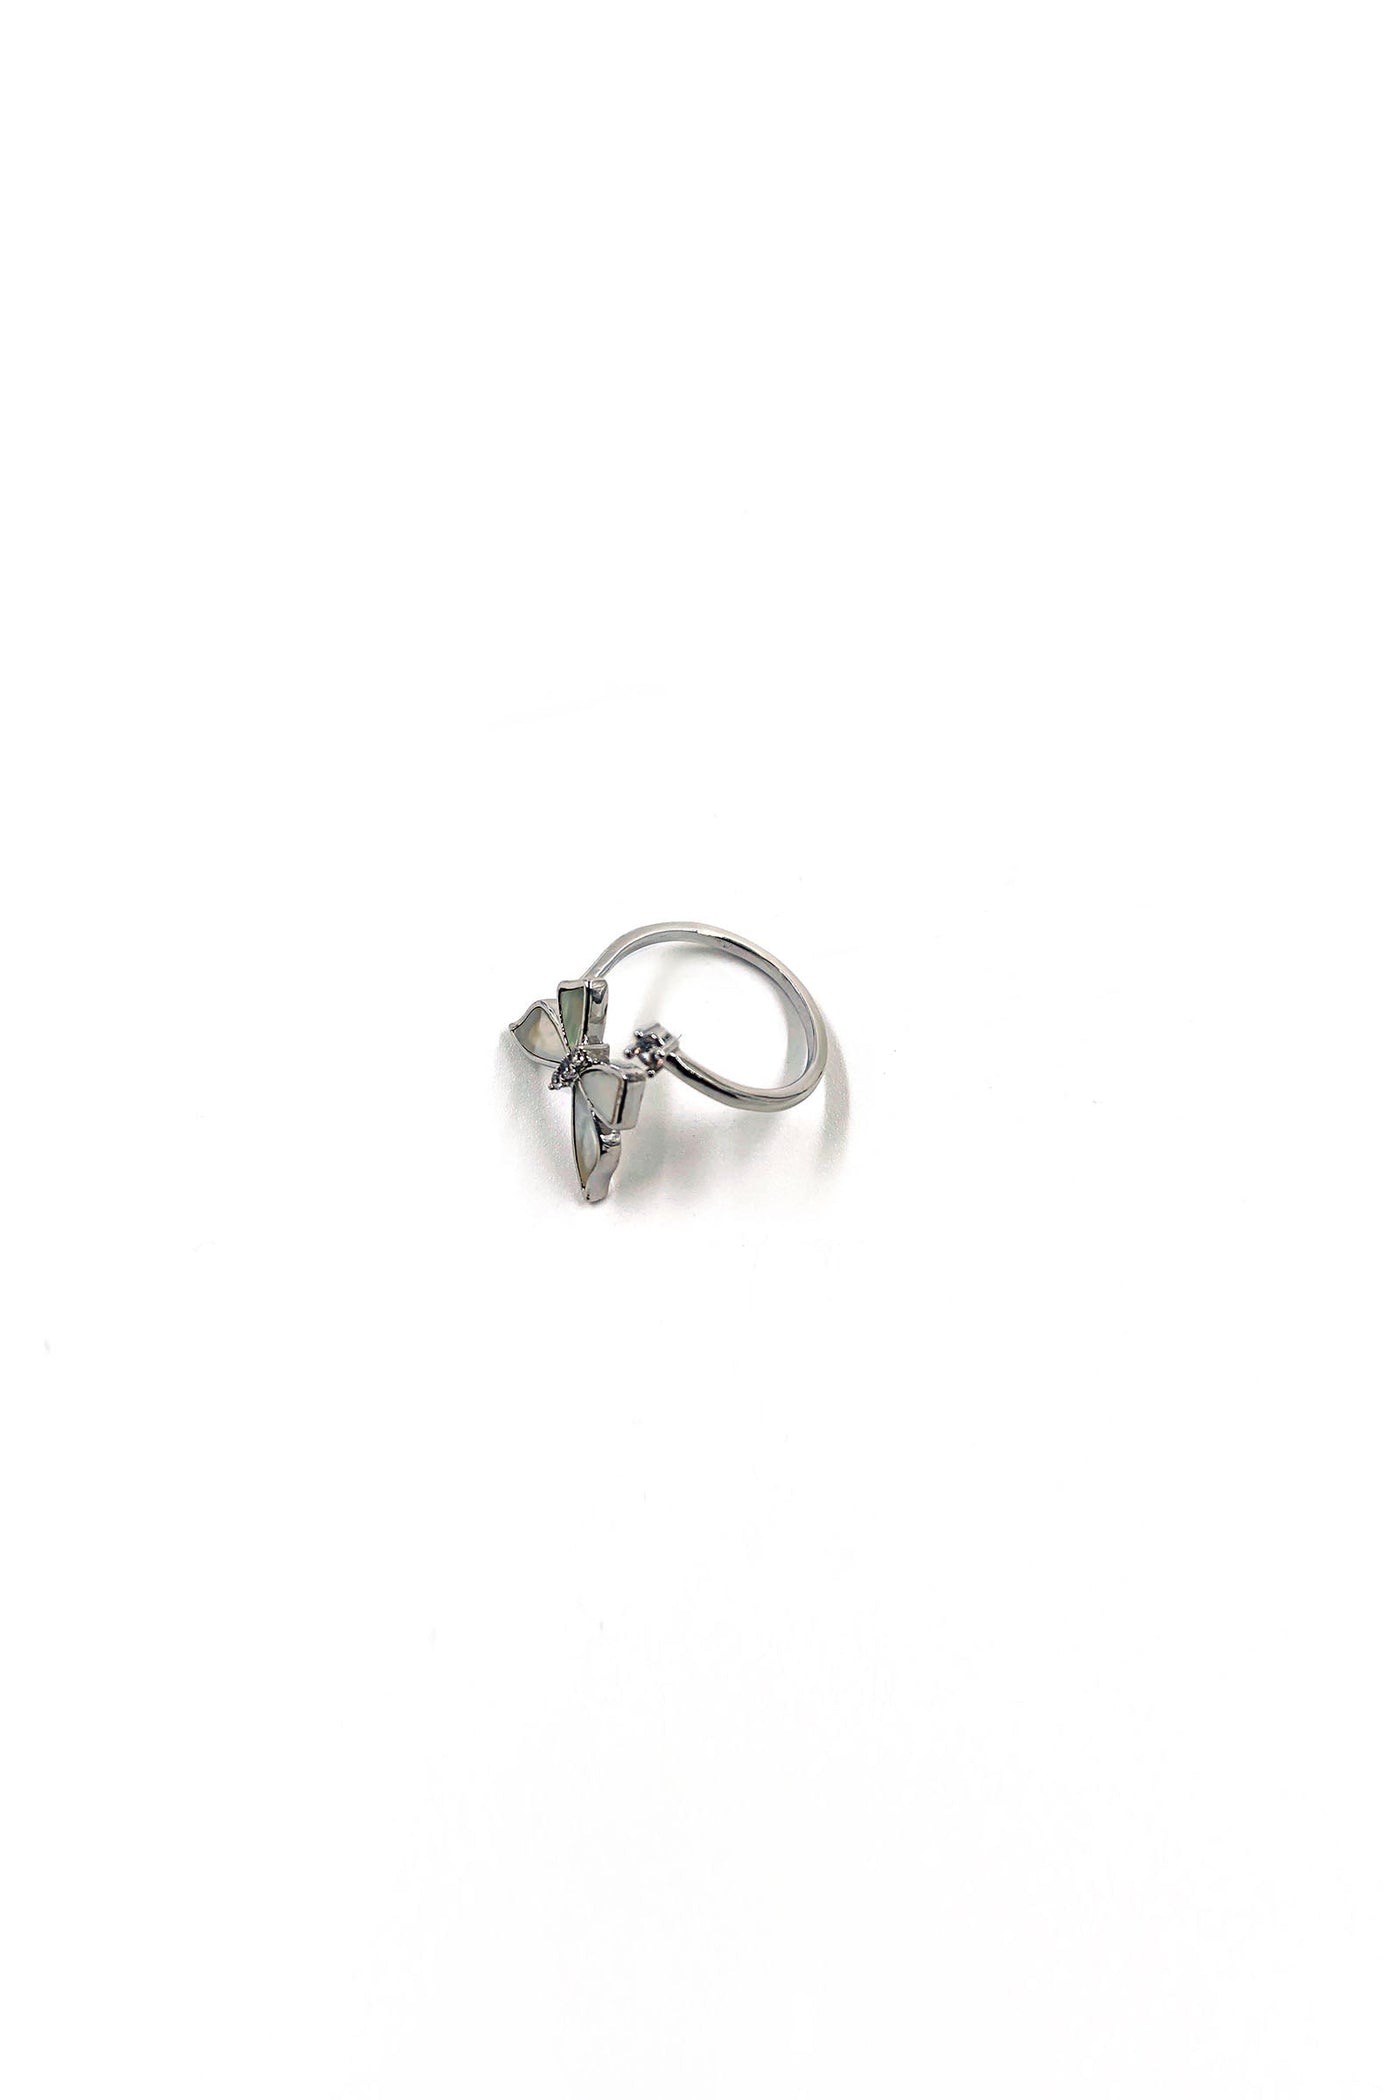 Silver Ring | ARG-W23-4 (Free Size)